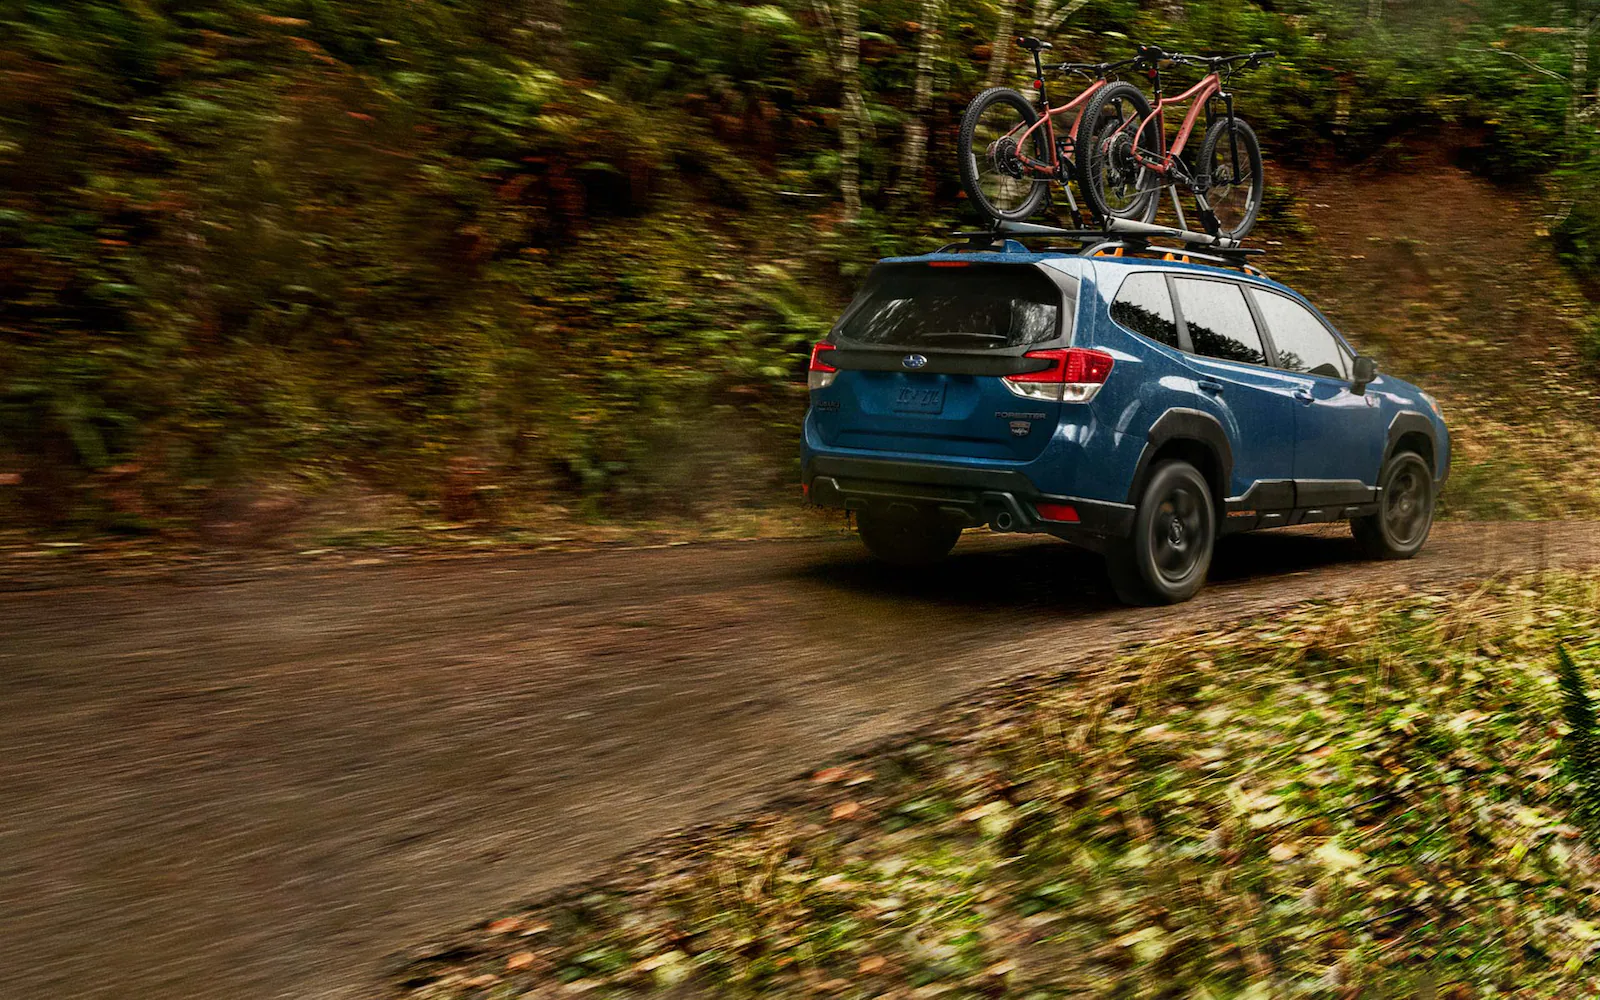 A 2022 Subaru Forester Wilderness on a forest road with roof bike rack.